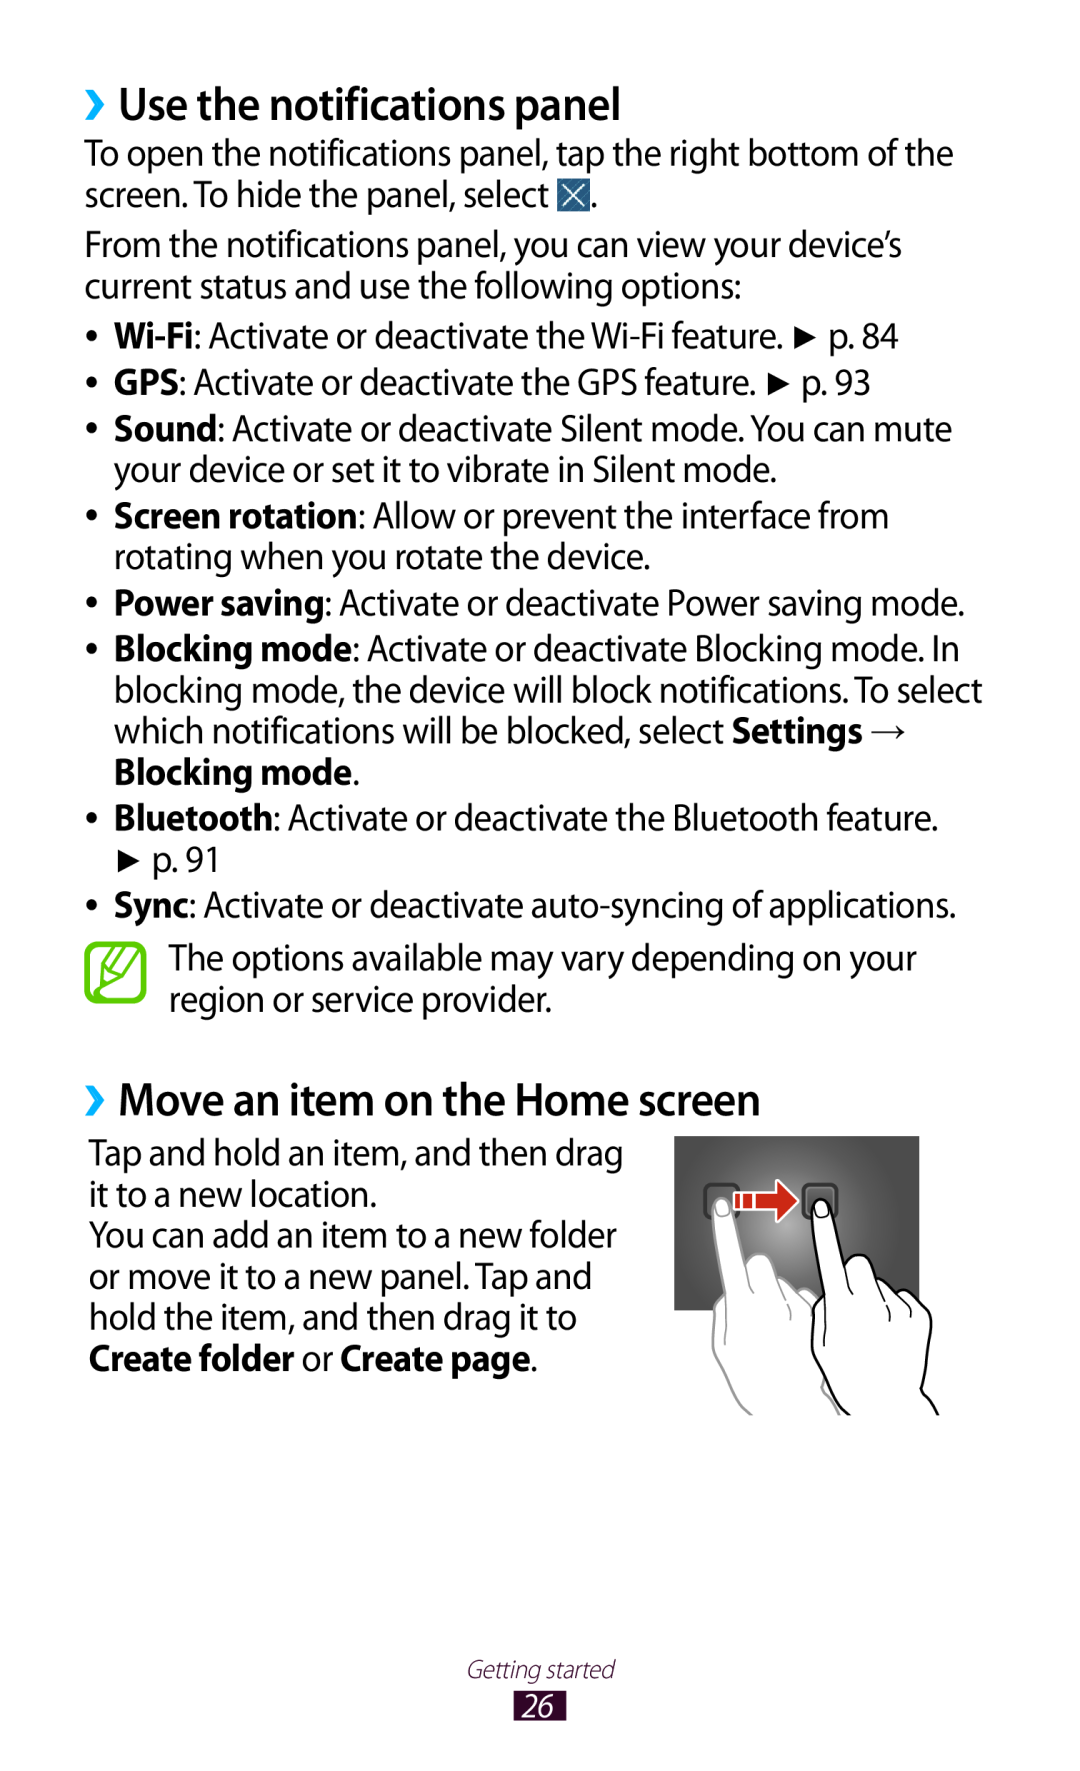 Samsung GTP5110ZWMTTT manual ››Use the notifications panel, ››Move an item on the Home screen 